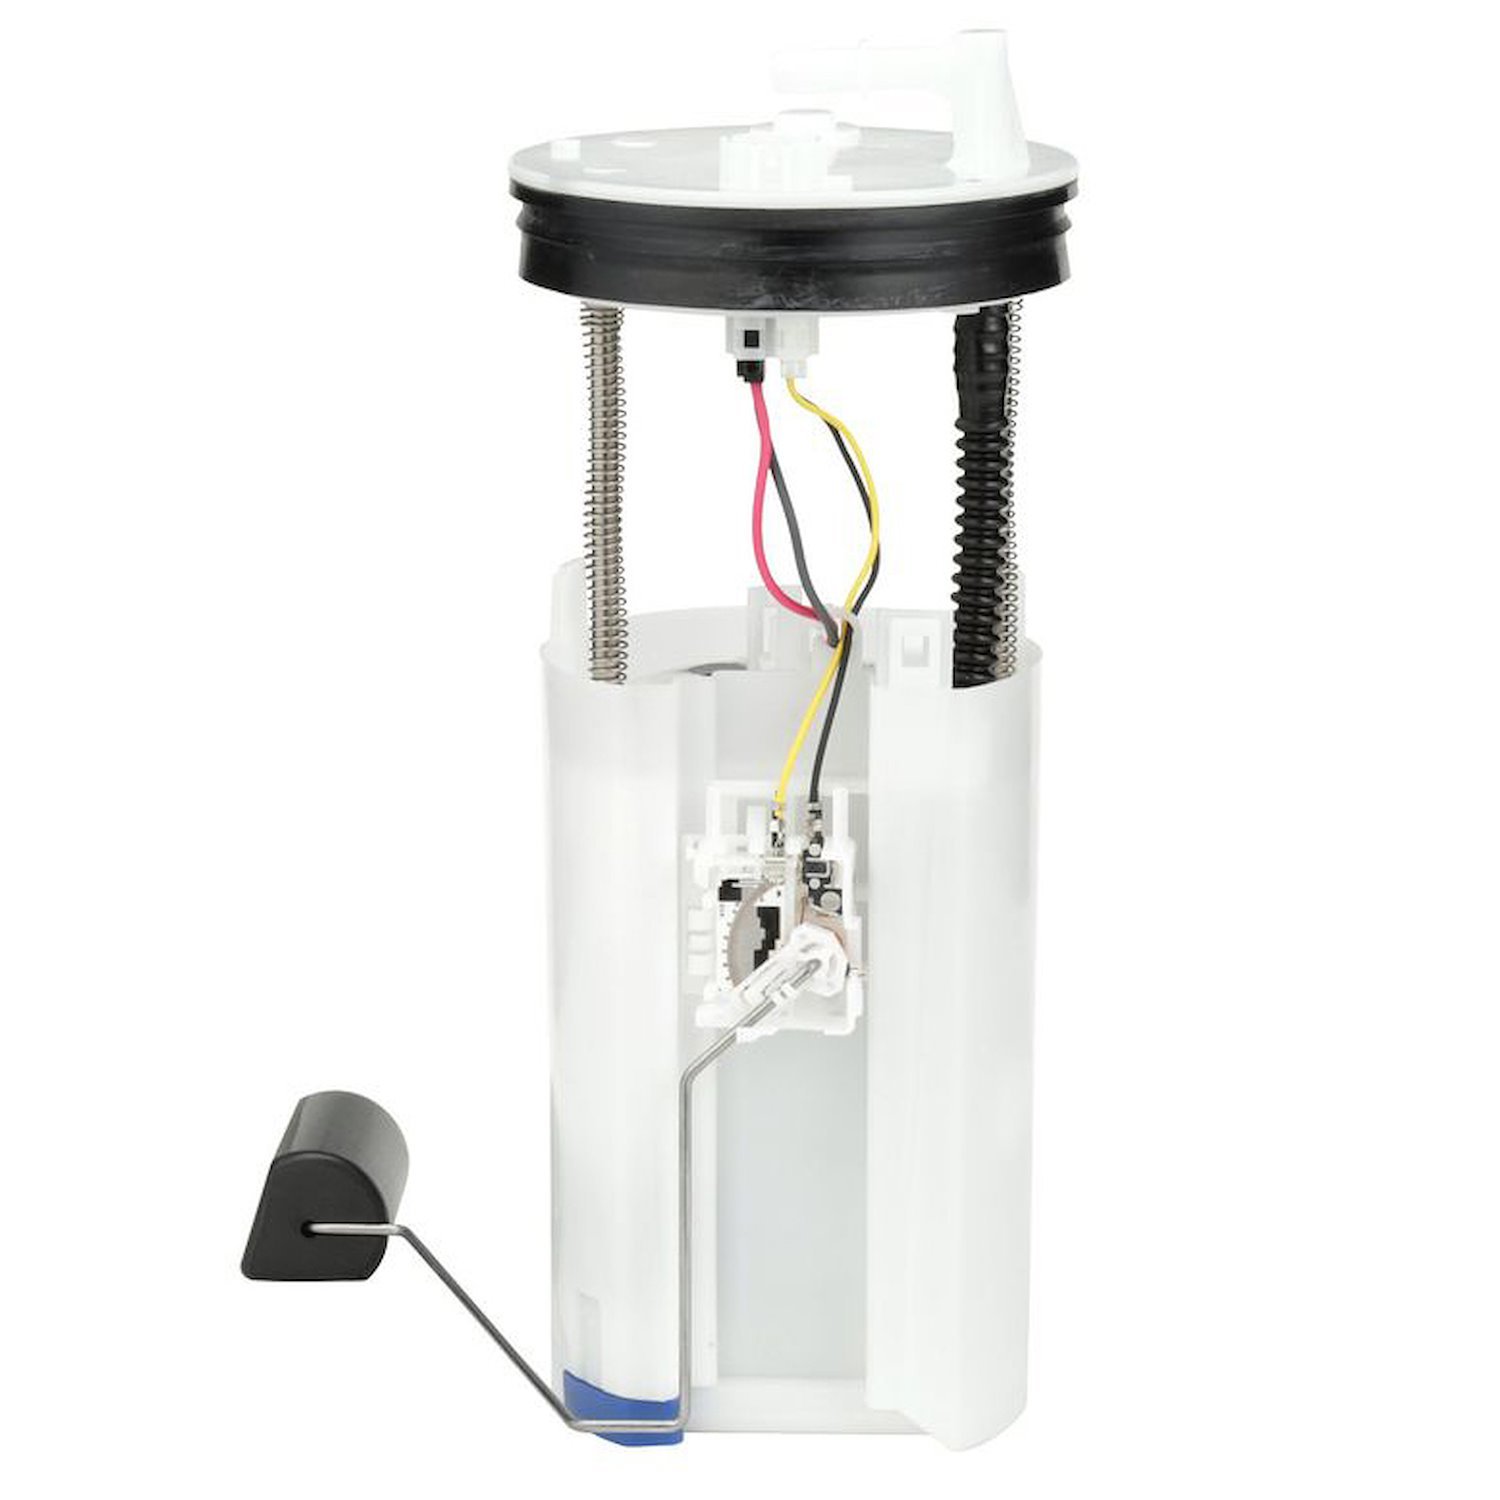 OE Replacement Fuel Pump Module Assembly for 2009-2011,2013-2015 Honda Pilot